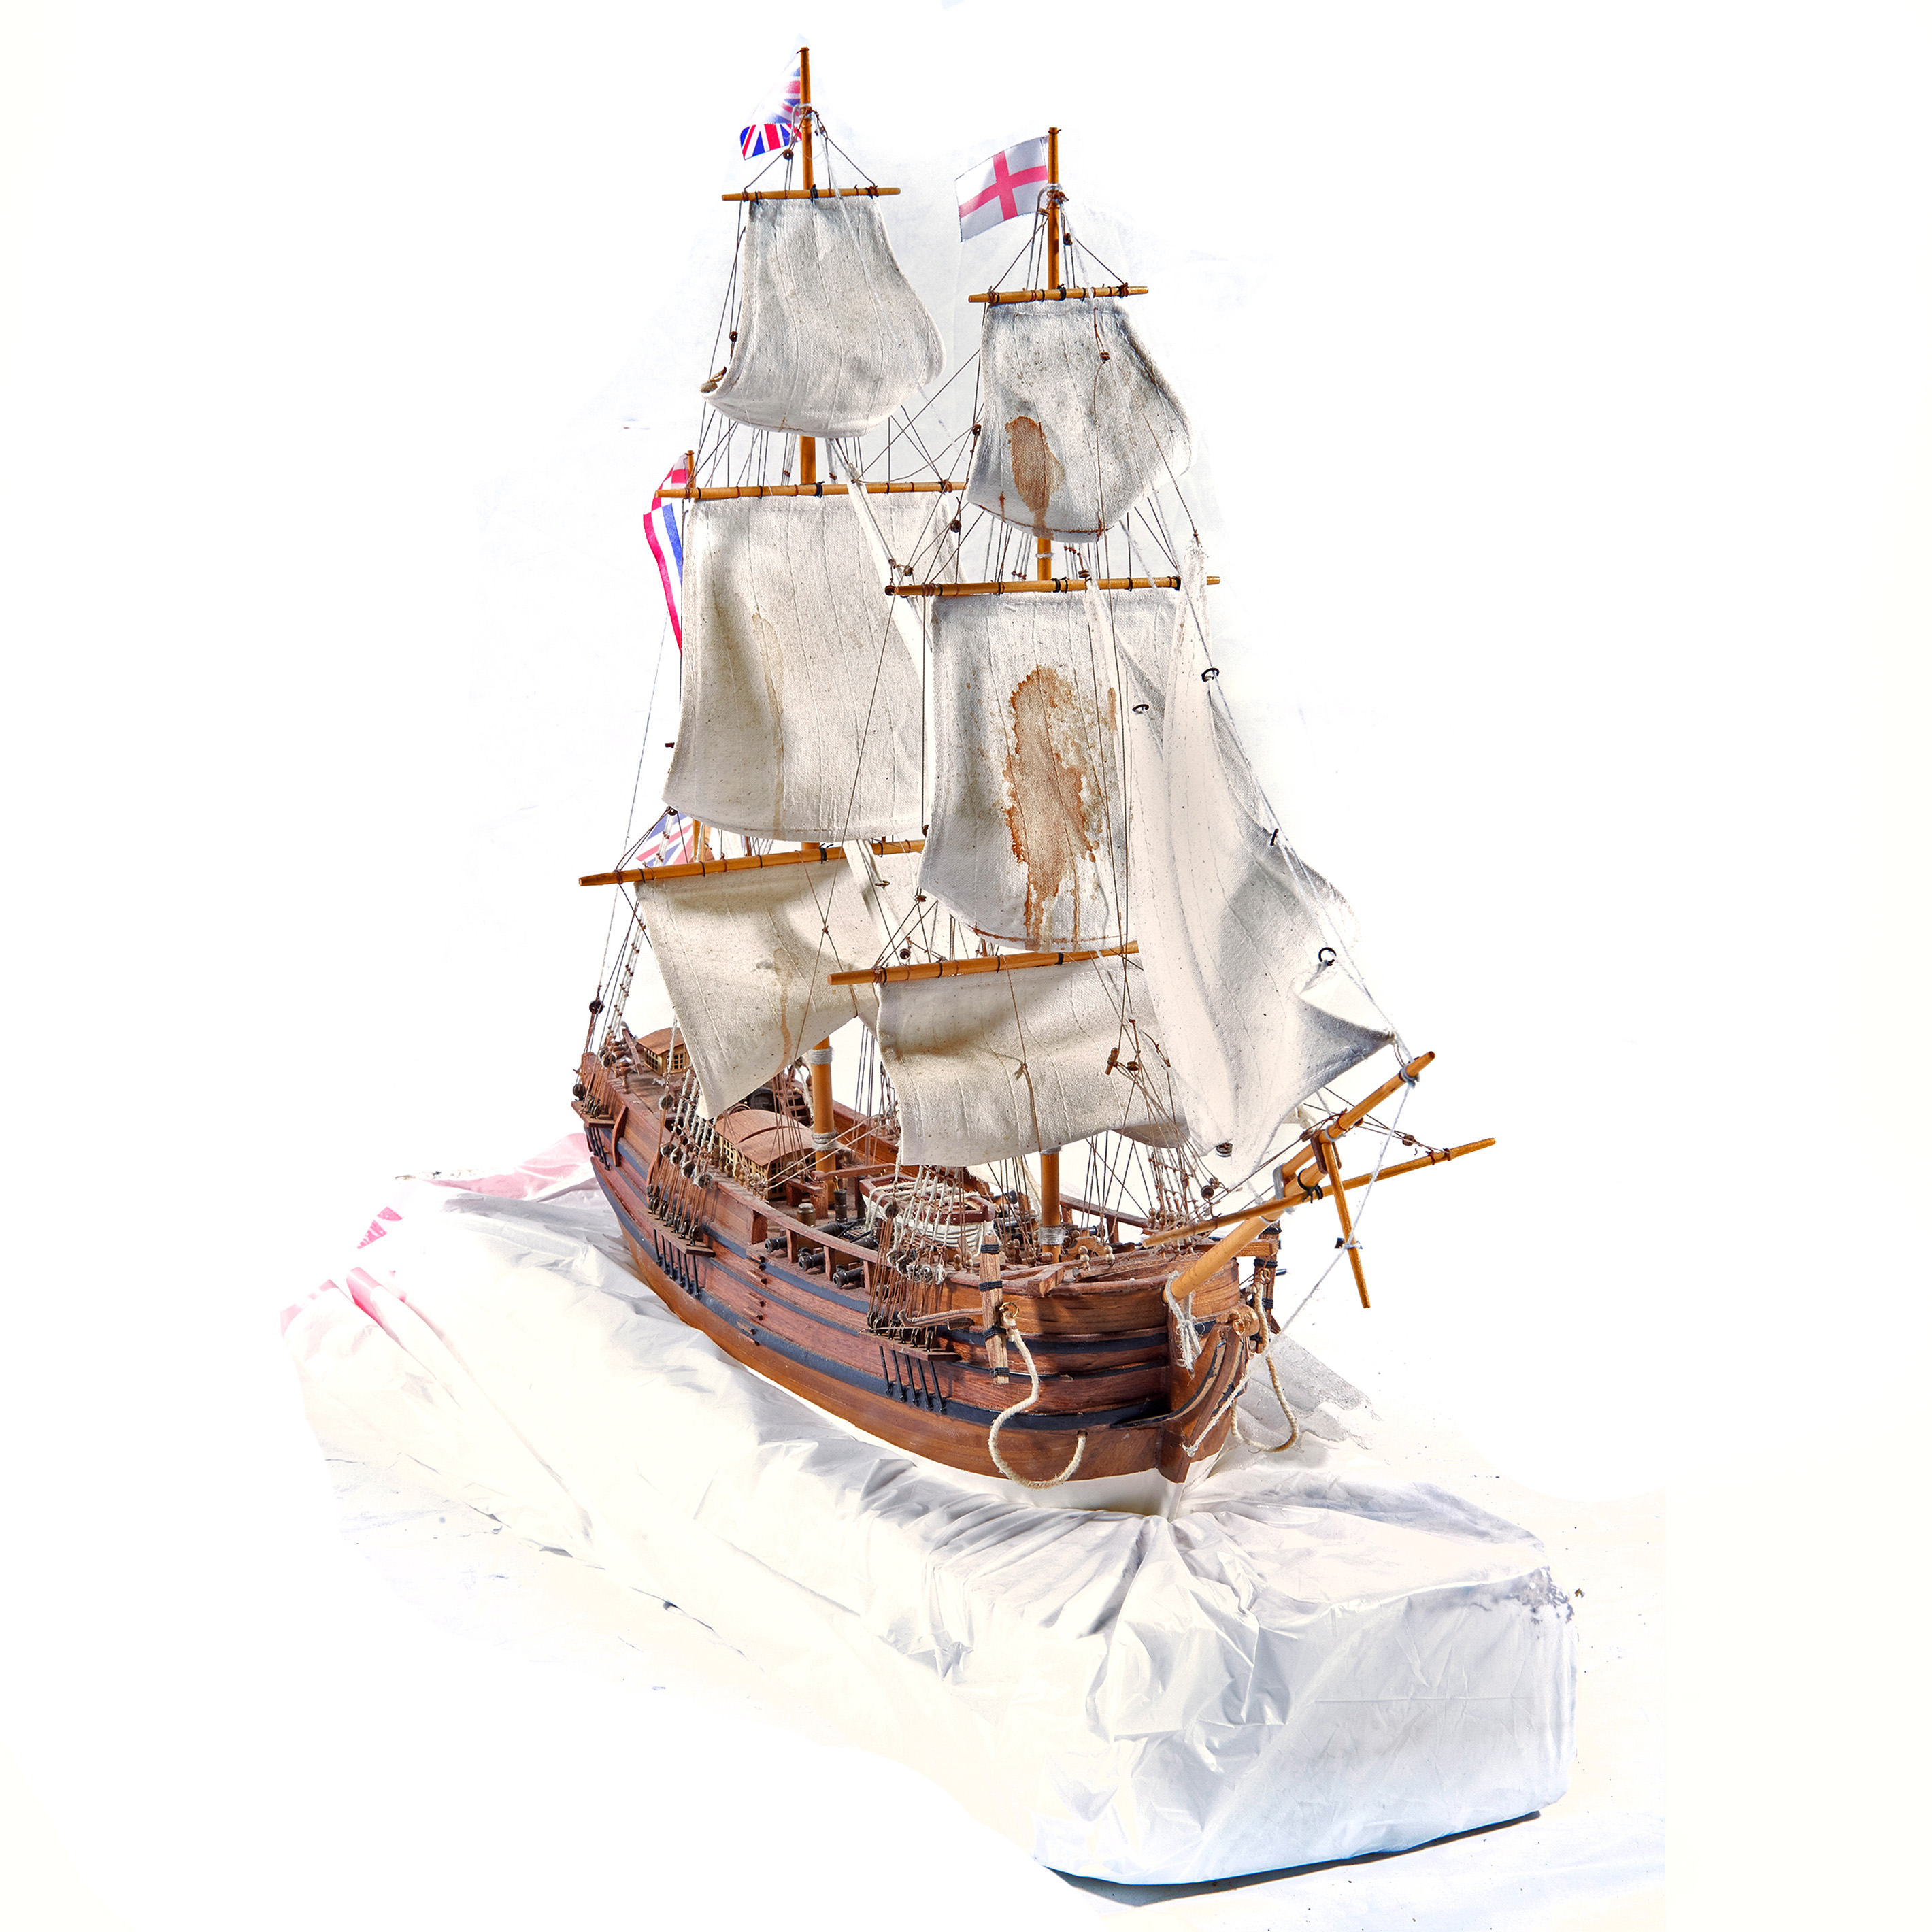 A HAND BUILT SCALE MODEL OF A GALLEON